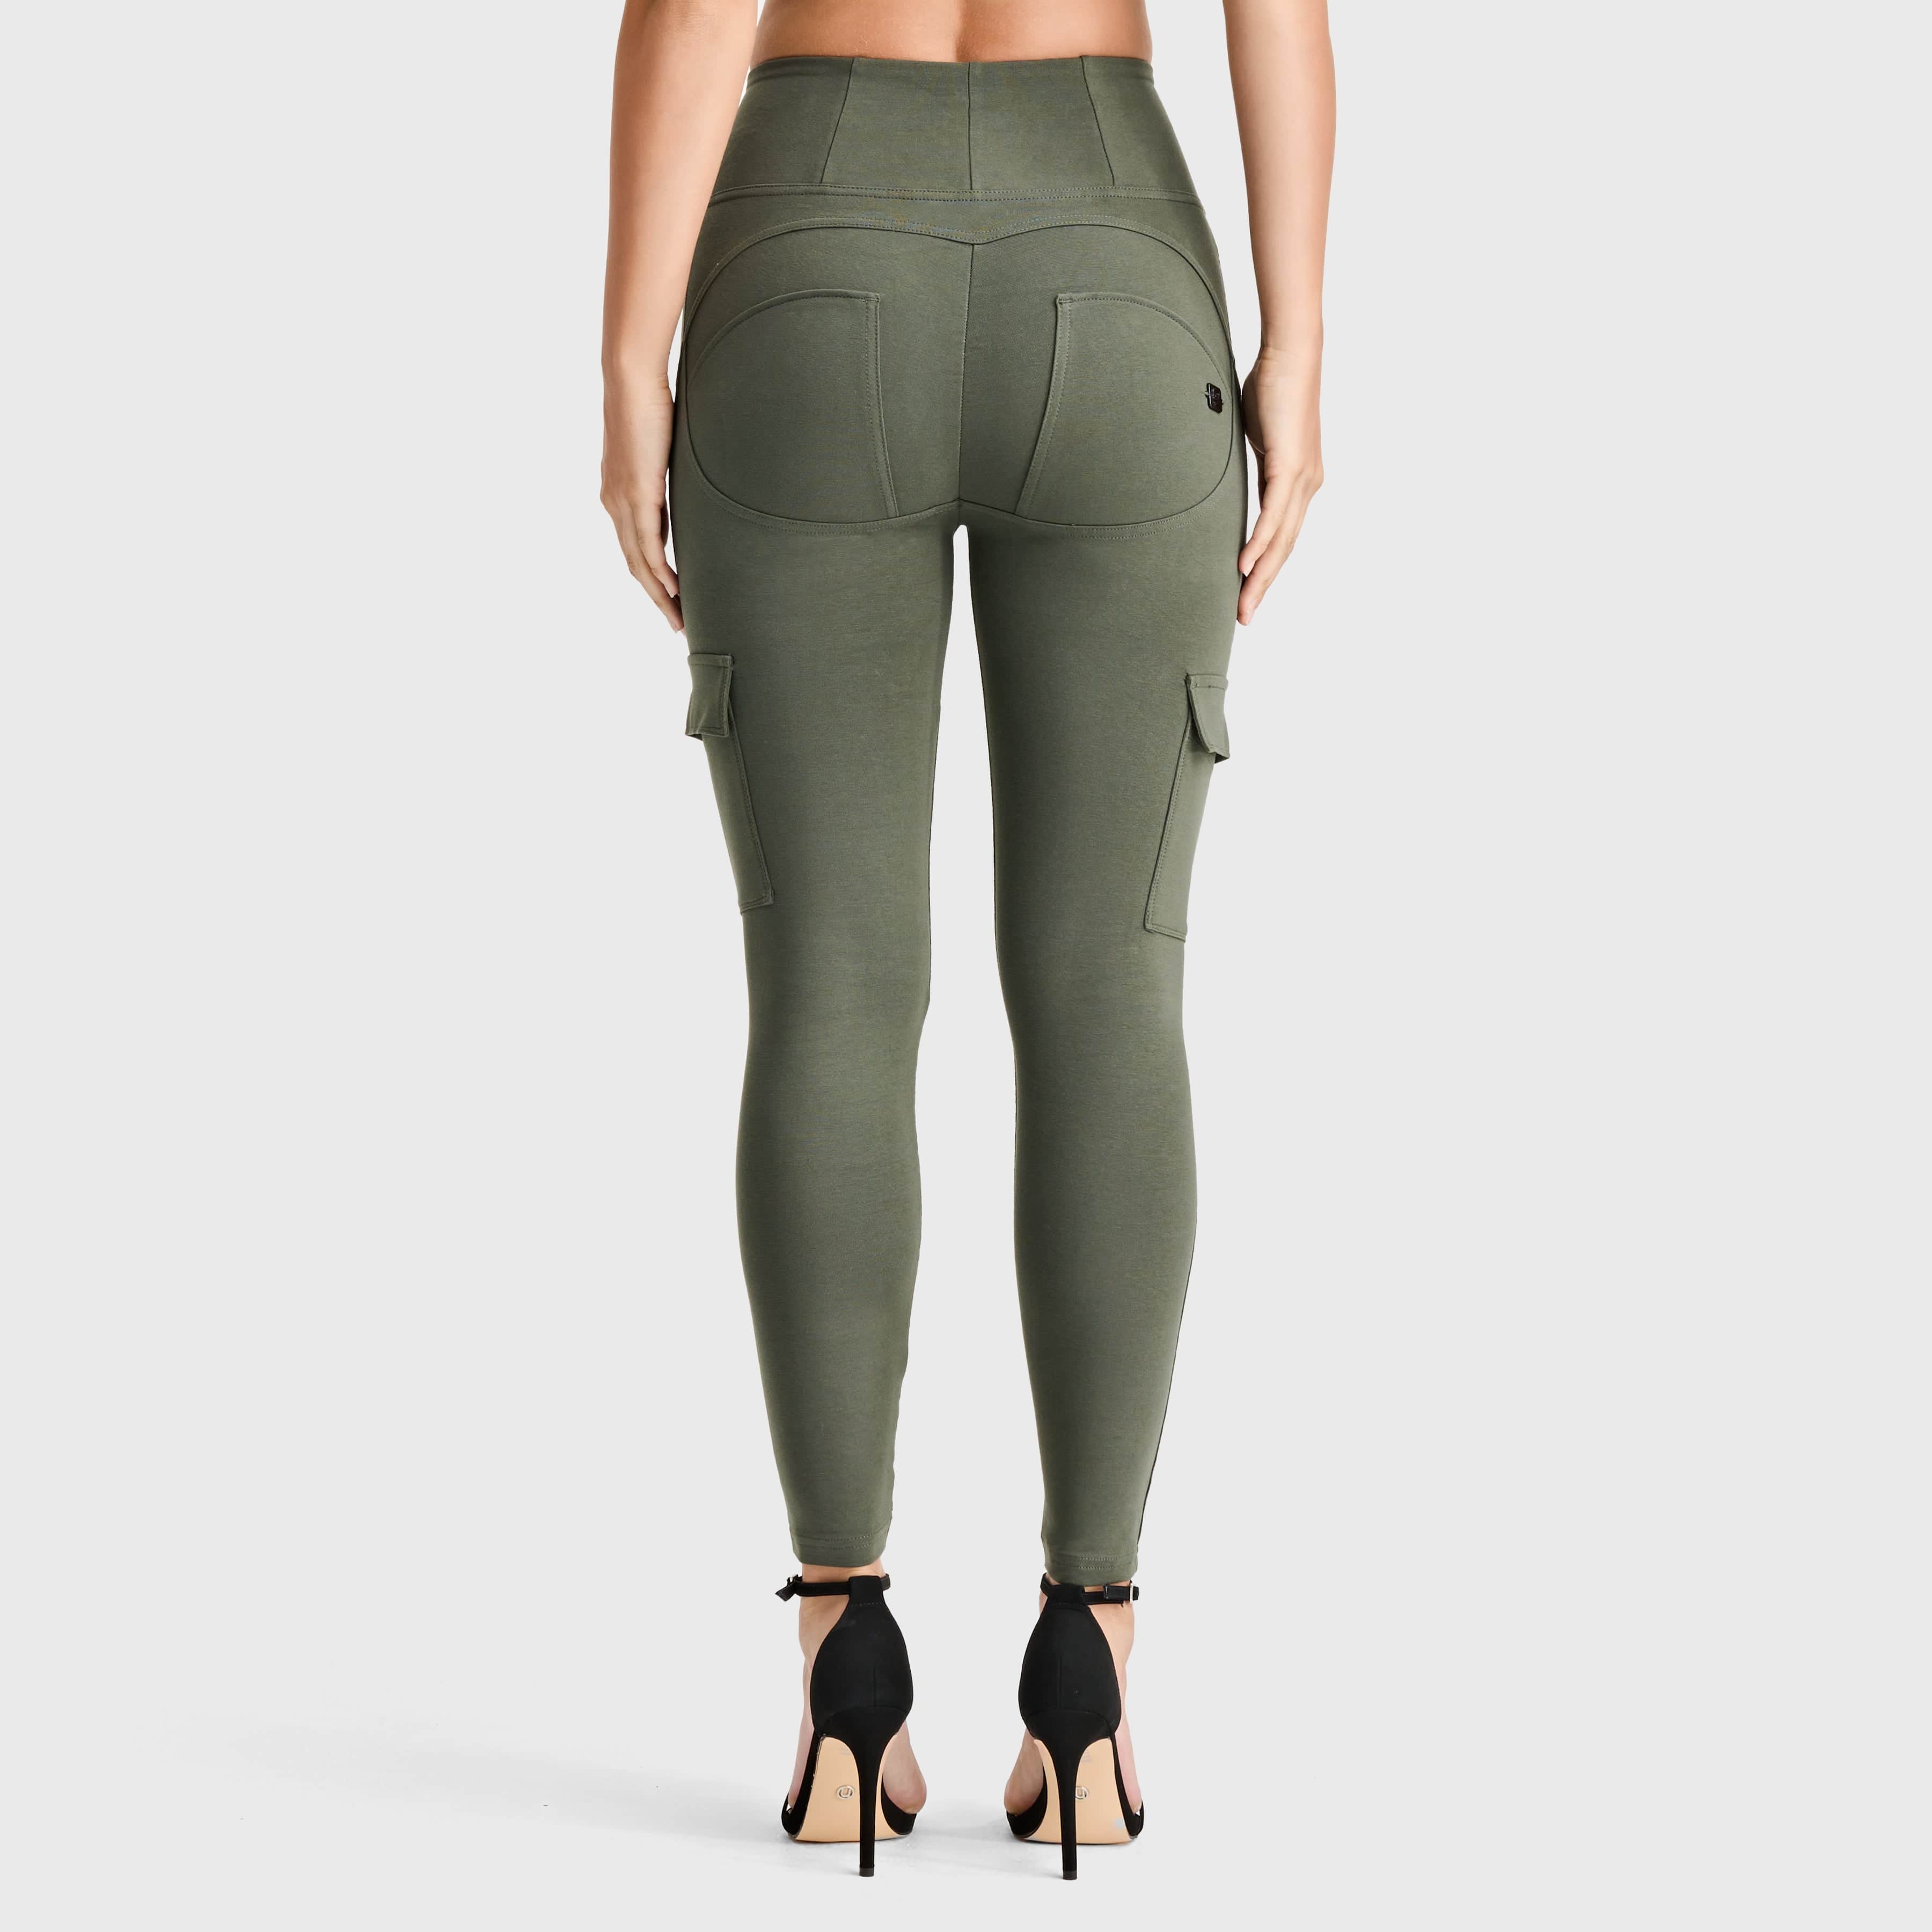 WR.UP® Cargo Fashion - High Waisted - 7/8 Length - Military Green 3